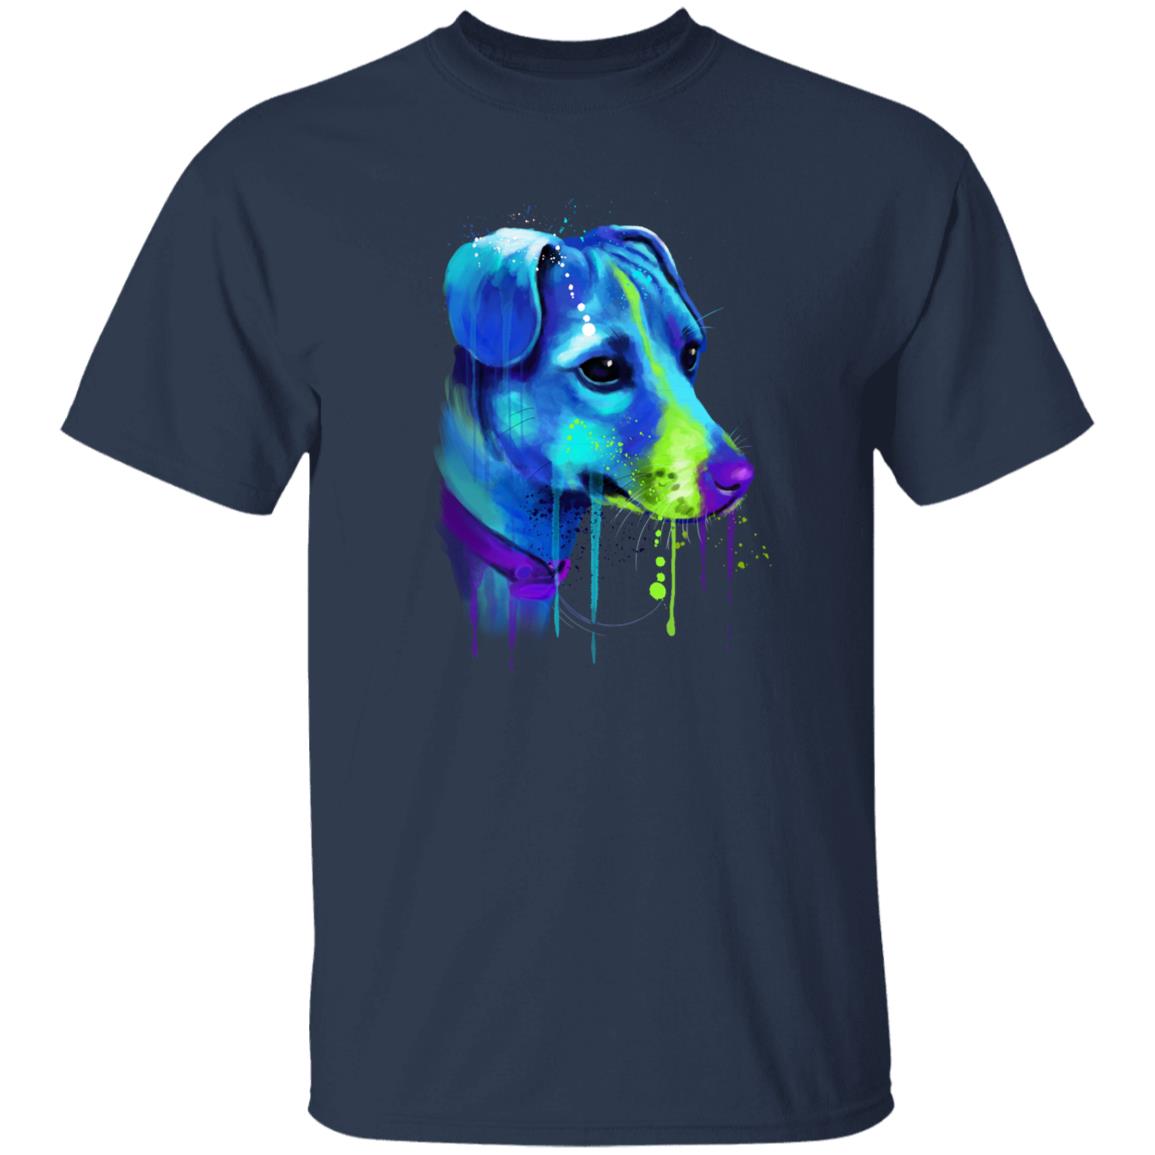 Watercolor painting Jack Russel dog Unisex shirt S-2XL black navy dark heather-Navy-Family-Gift-Planet